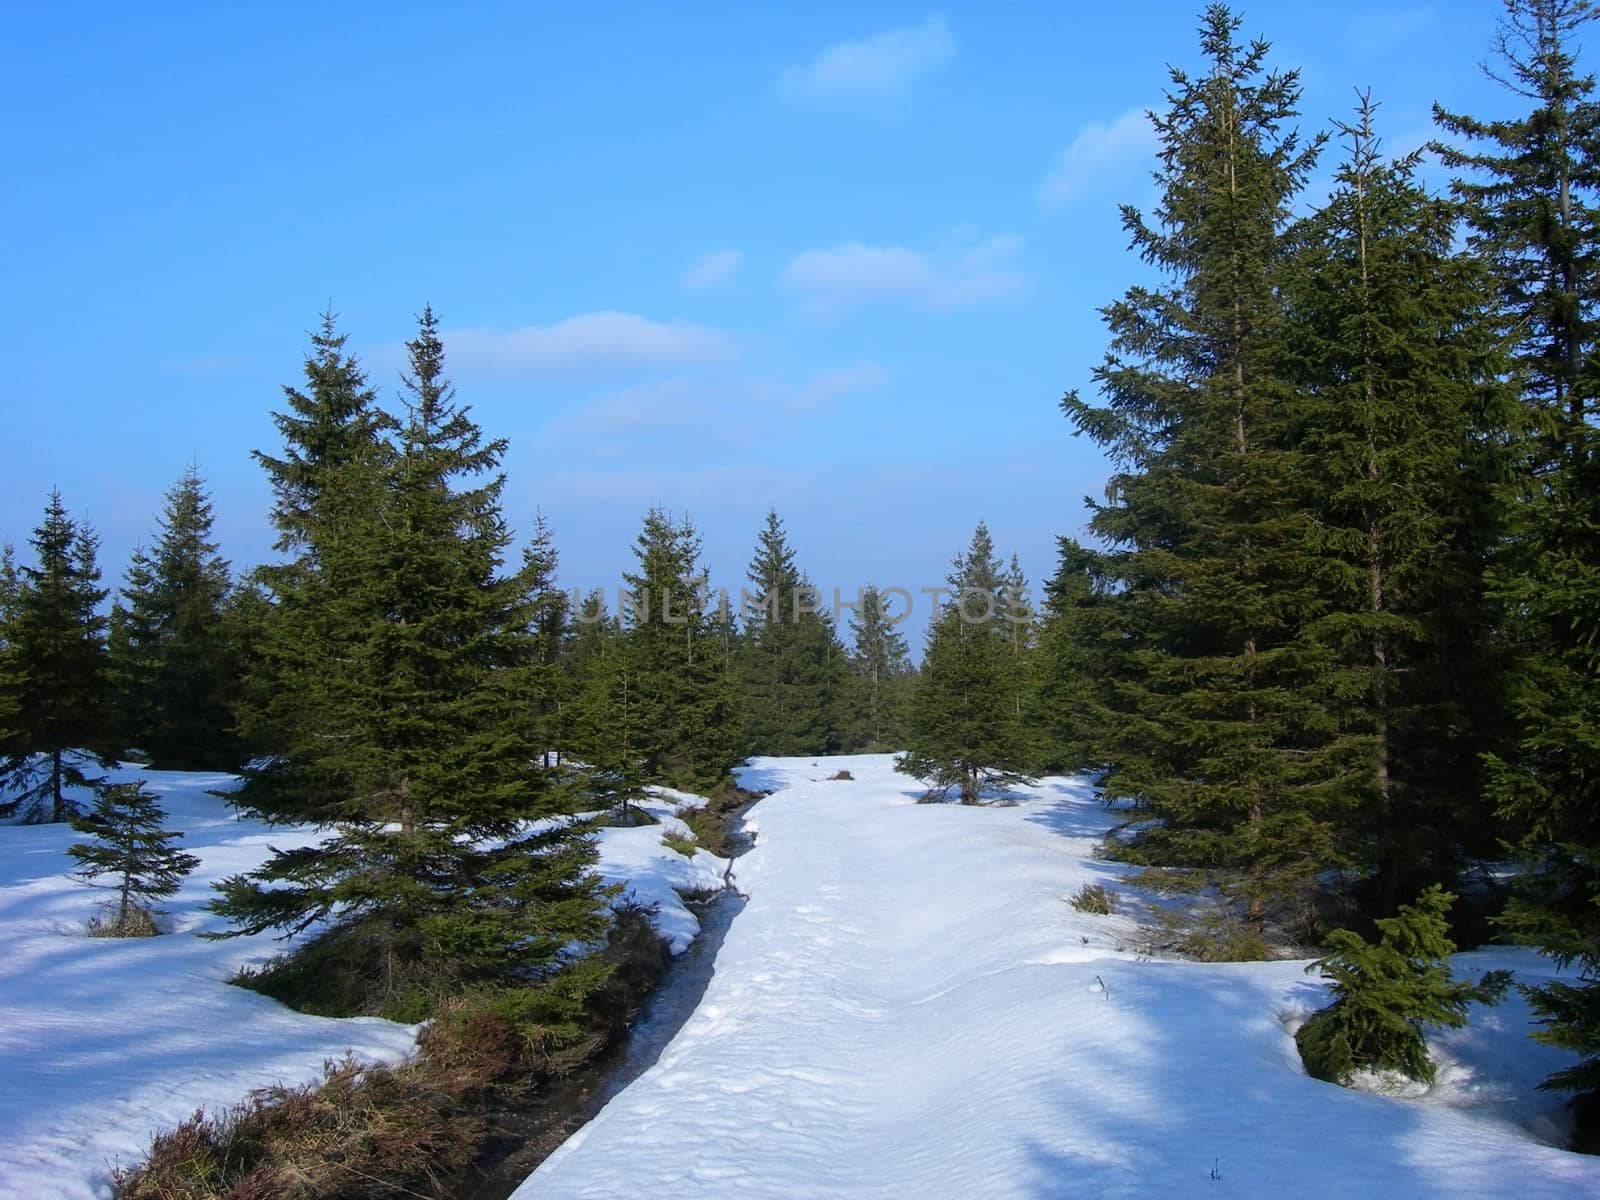  Photo of a frozen forest covered by snow